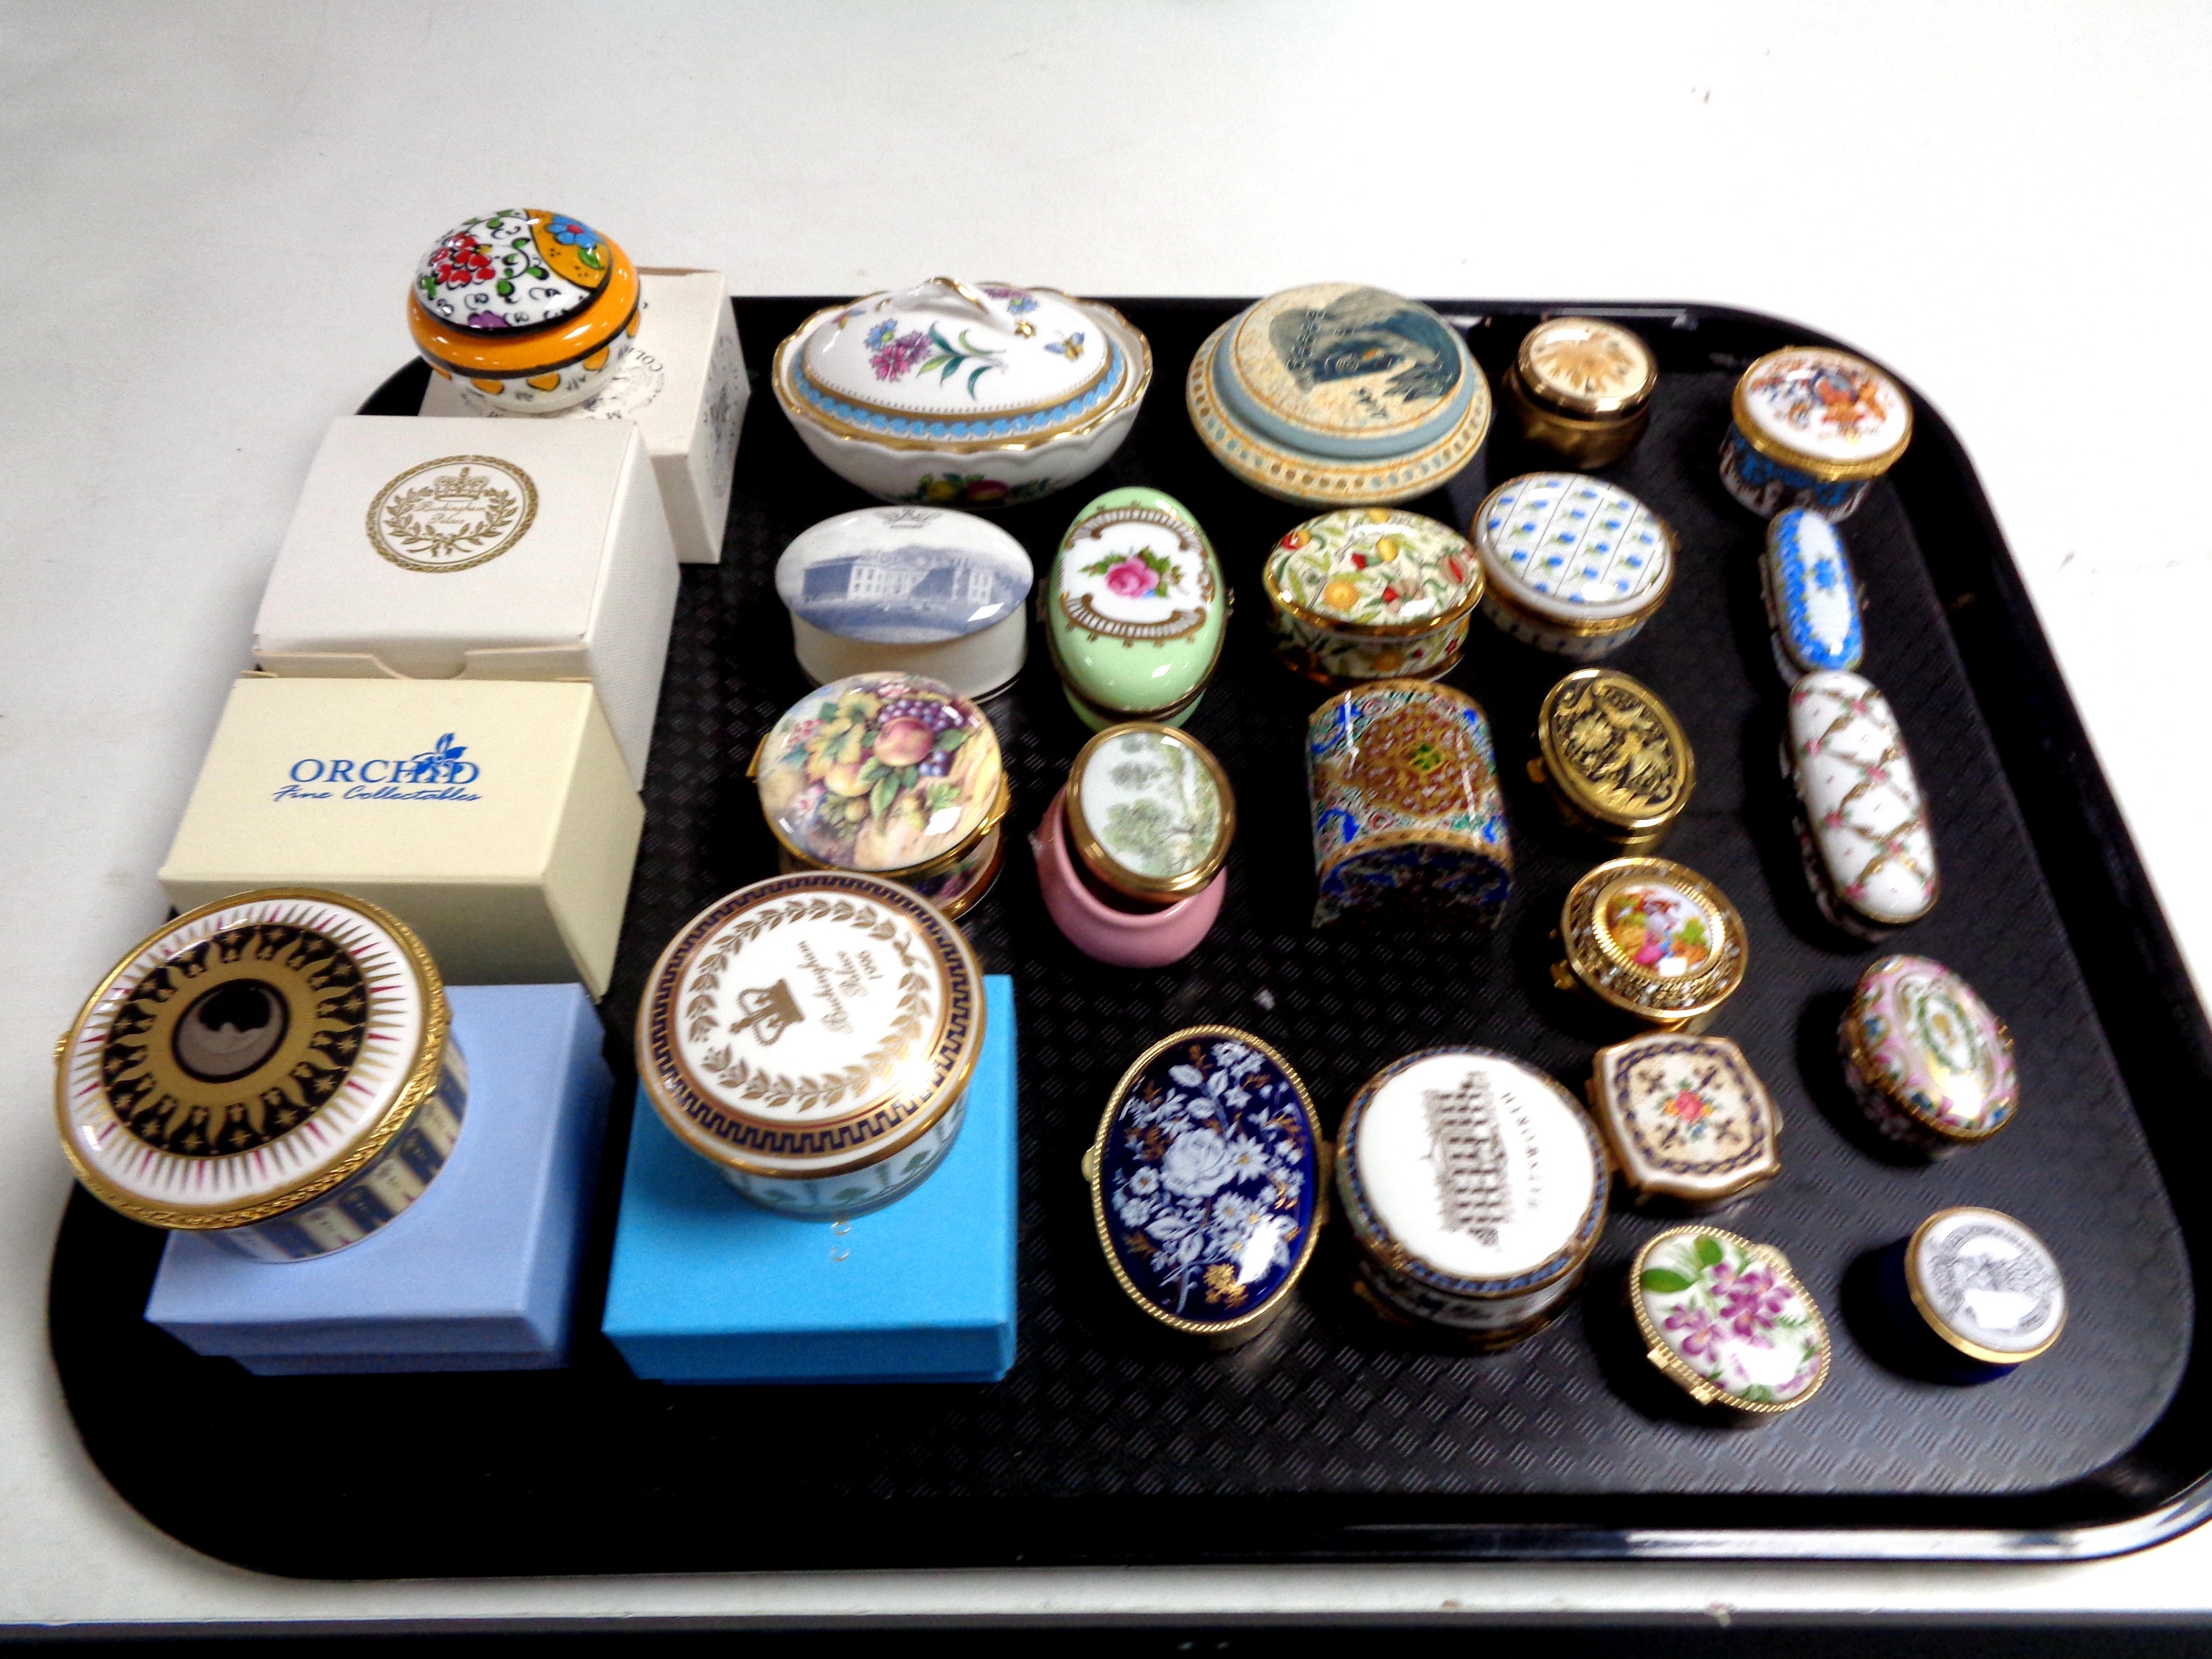 A tray of pill boxes and lidded trinket dishes